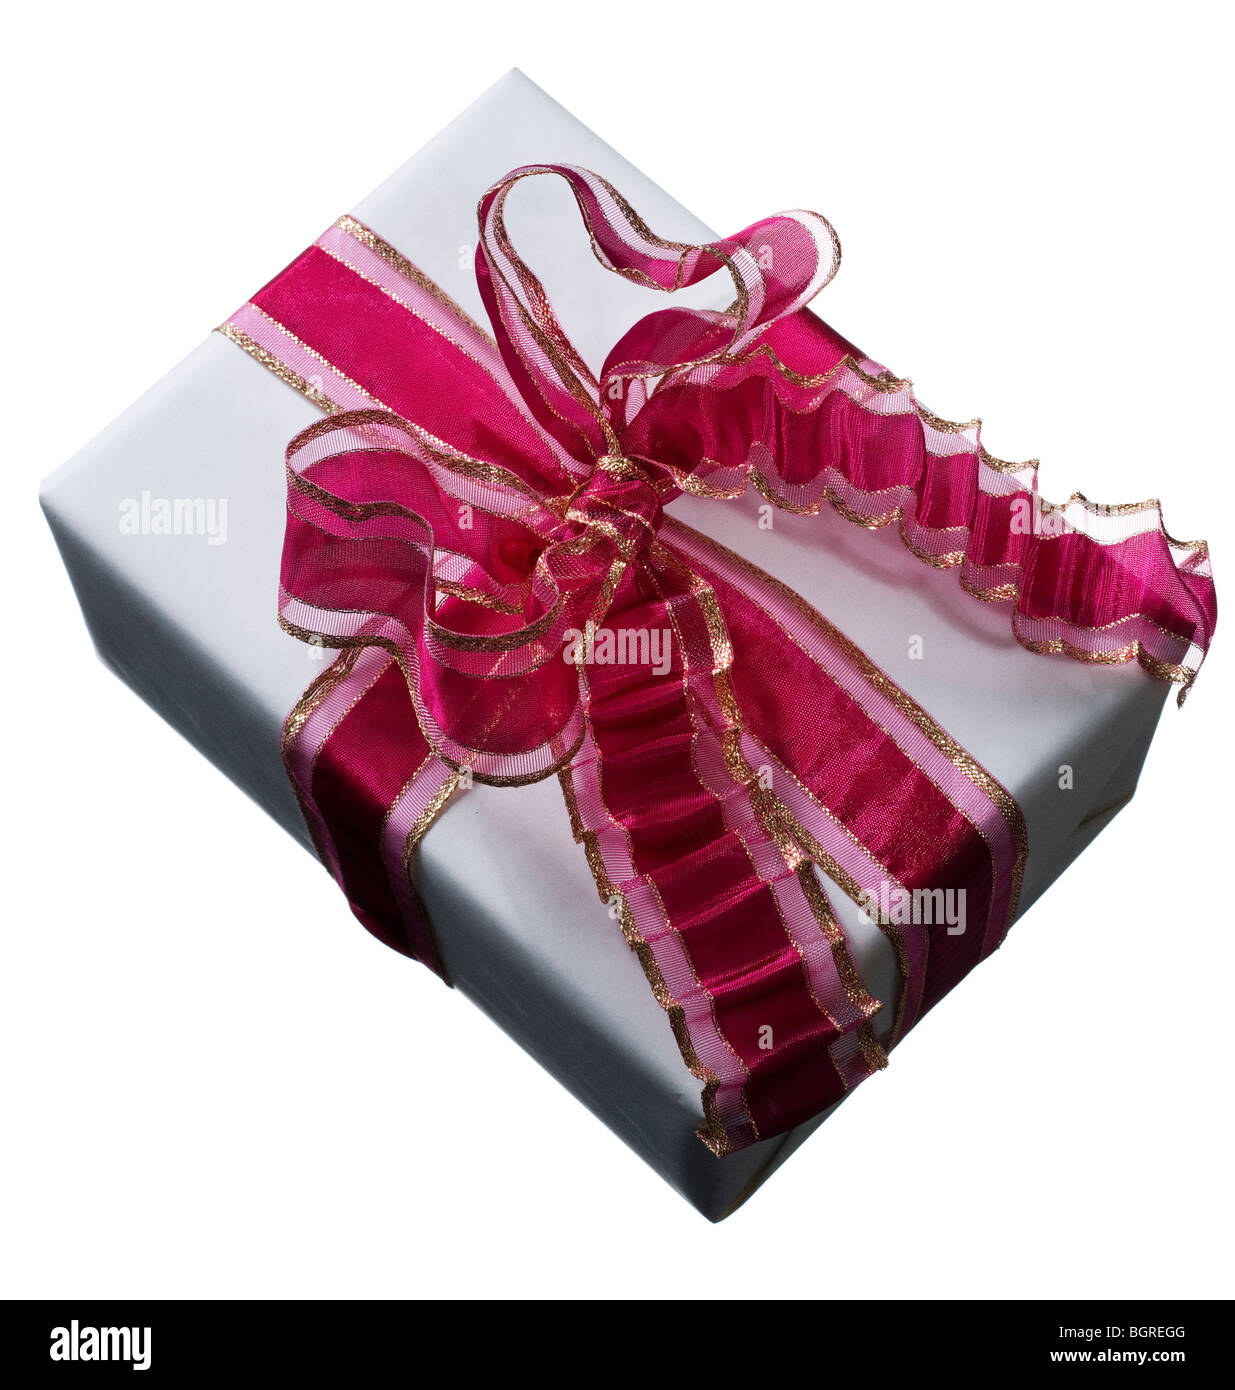 A wrapped gift against a white background. Stock Photo